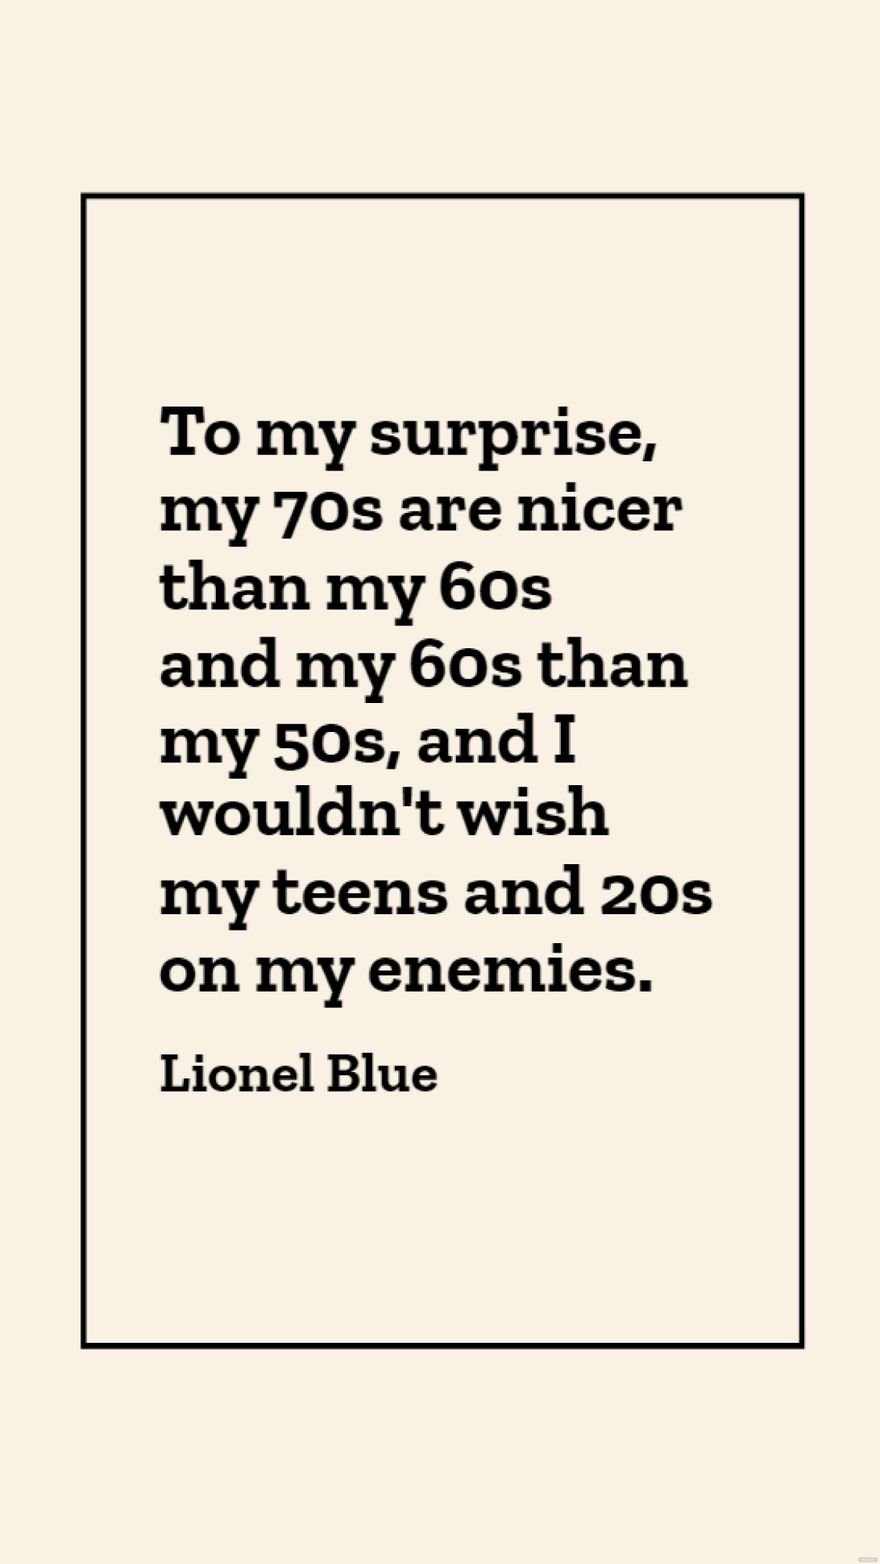 Lionel Blue - To my surprise, my 70s are nicer than my 60s and my 60s than my 50s, and I wouldn't wish my teens and 20s on my enemies.